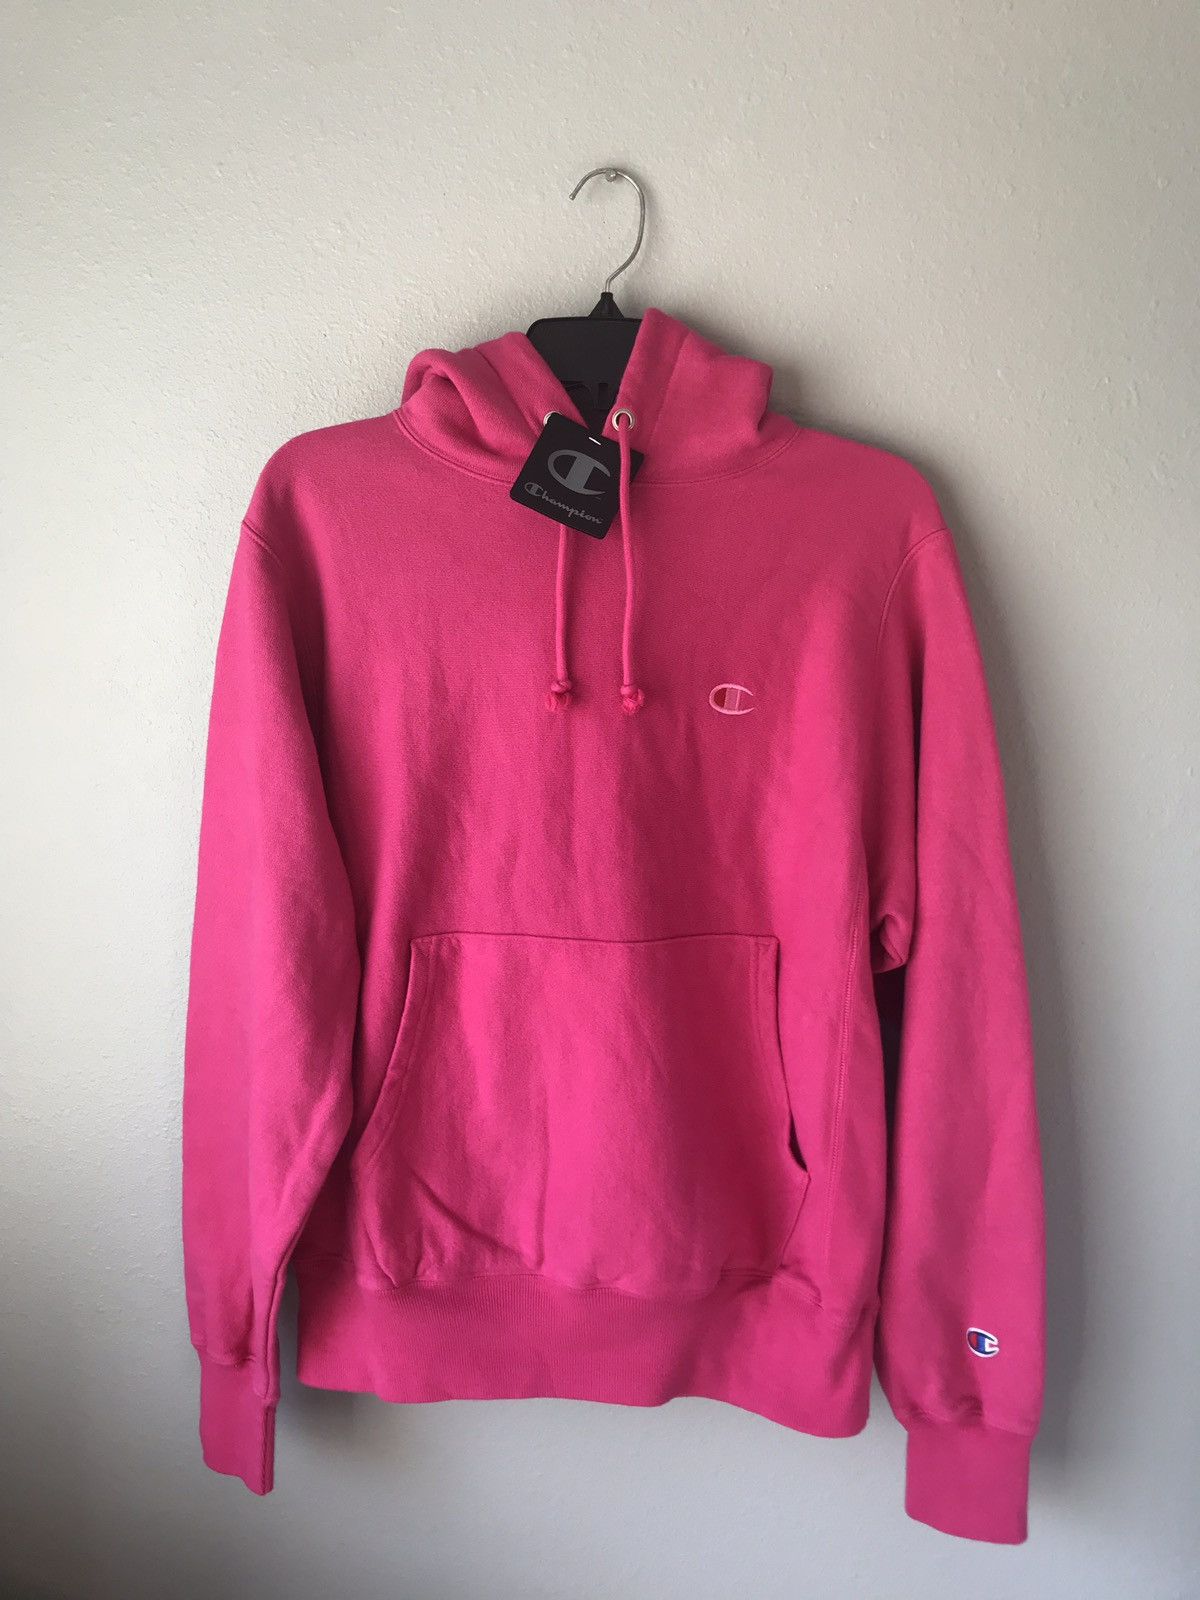 Champion Champion Reverse Weave Pink Pigment Dyed Hoodie Size US S / EU 44-46 / 1 - 4 Preview